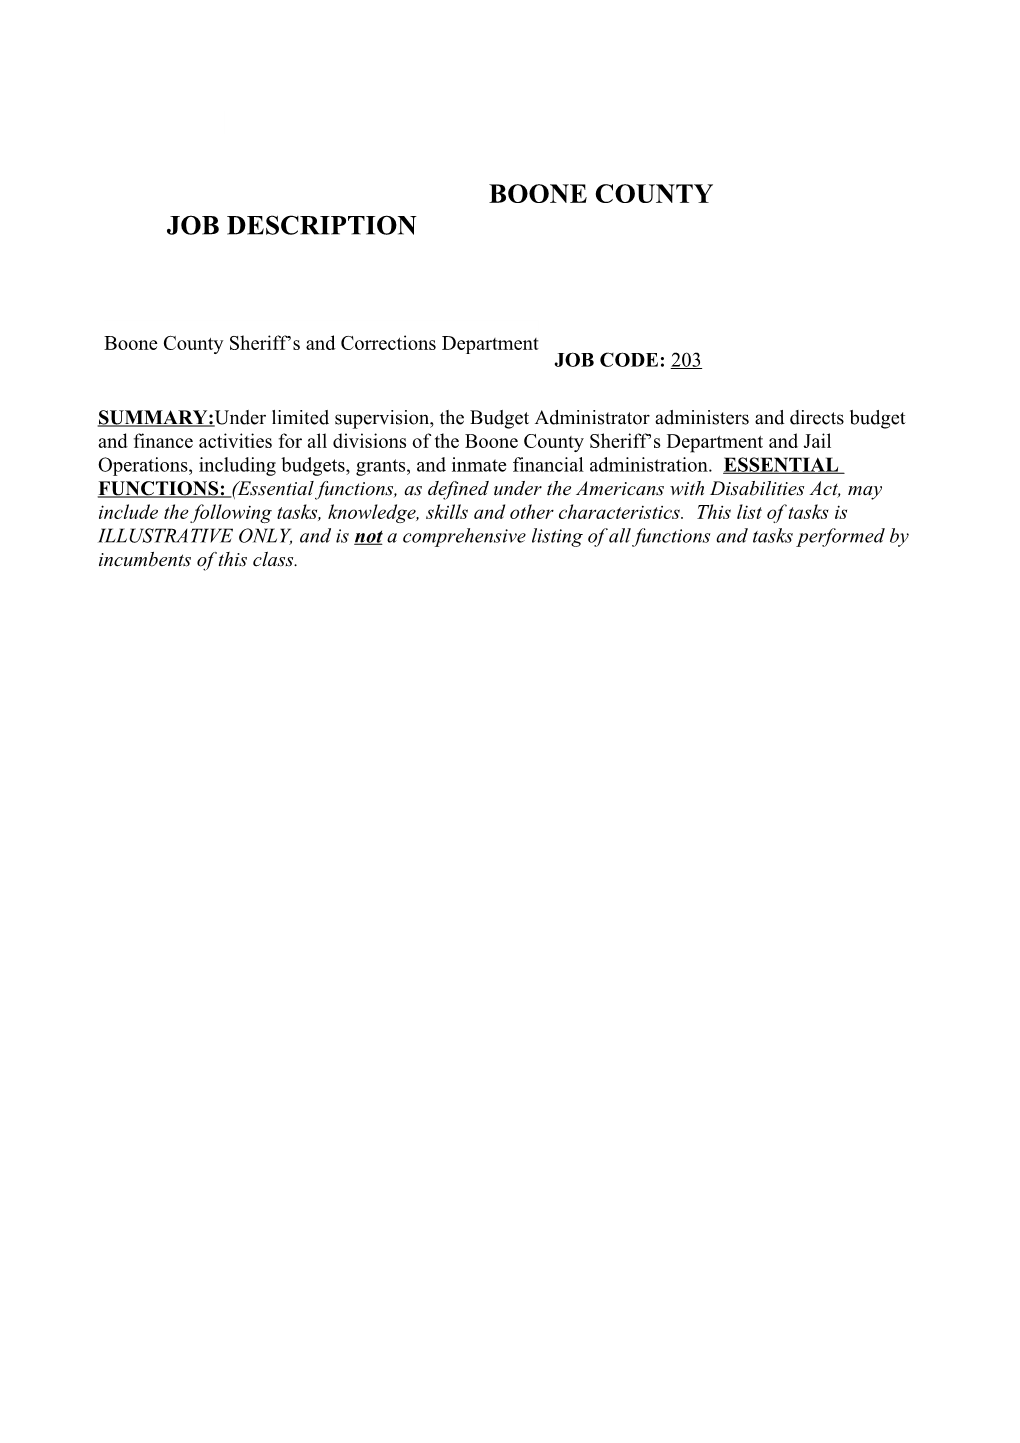 Budget Administrator 406000 Position Number 729